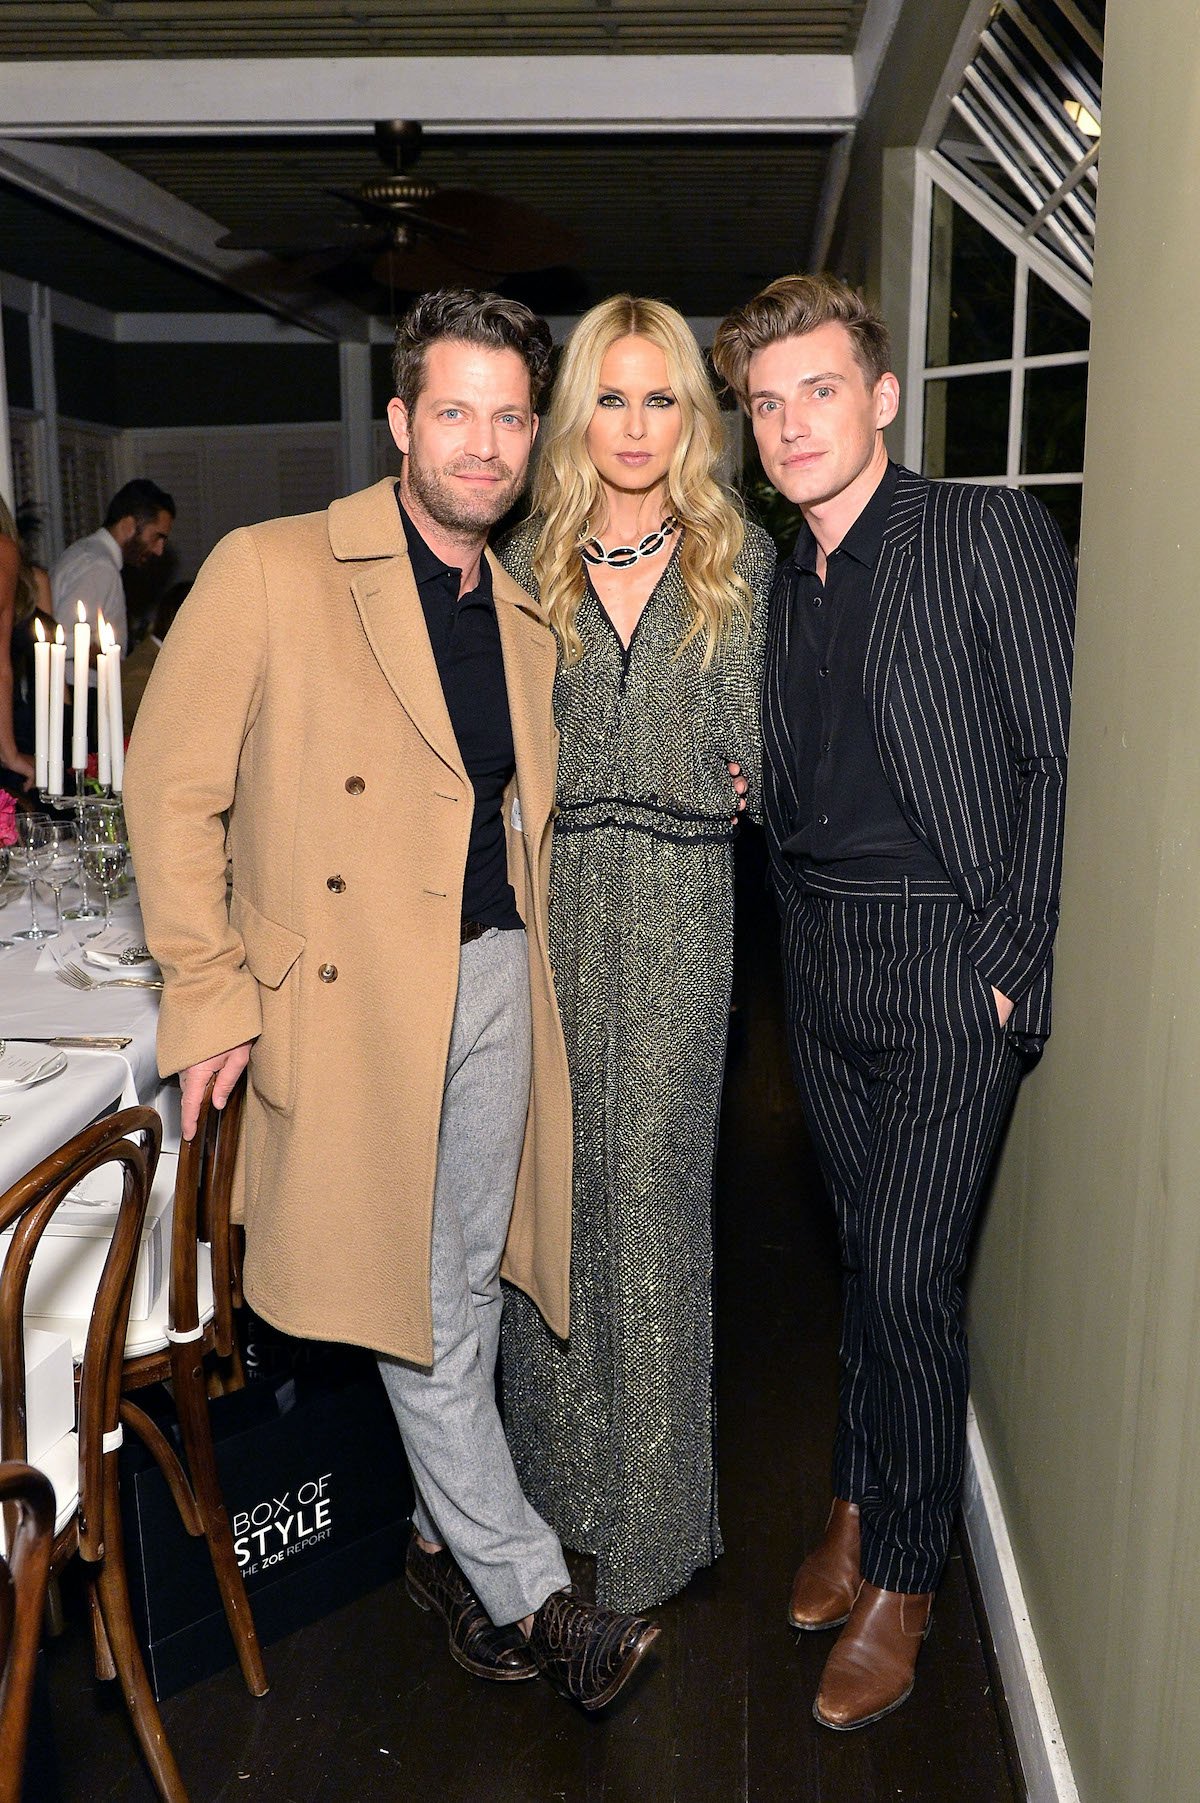 Nate Berkus, Rachel Zoe and Jeremiah Brent attend The Zoe Report's Box of Style Winter Edition Dinner